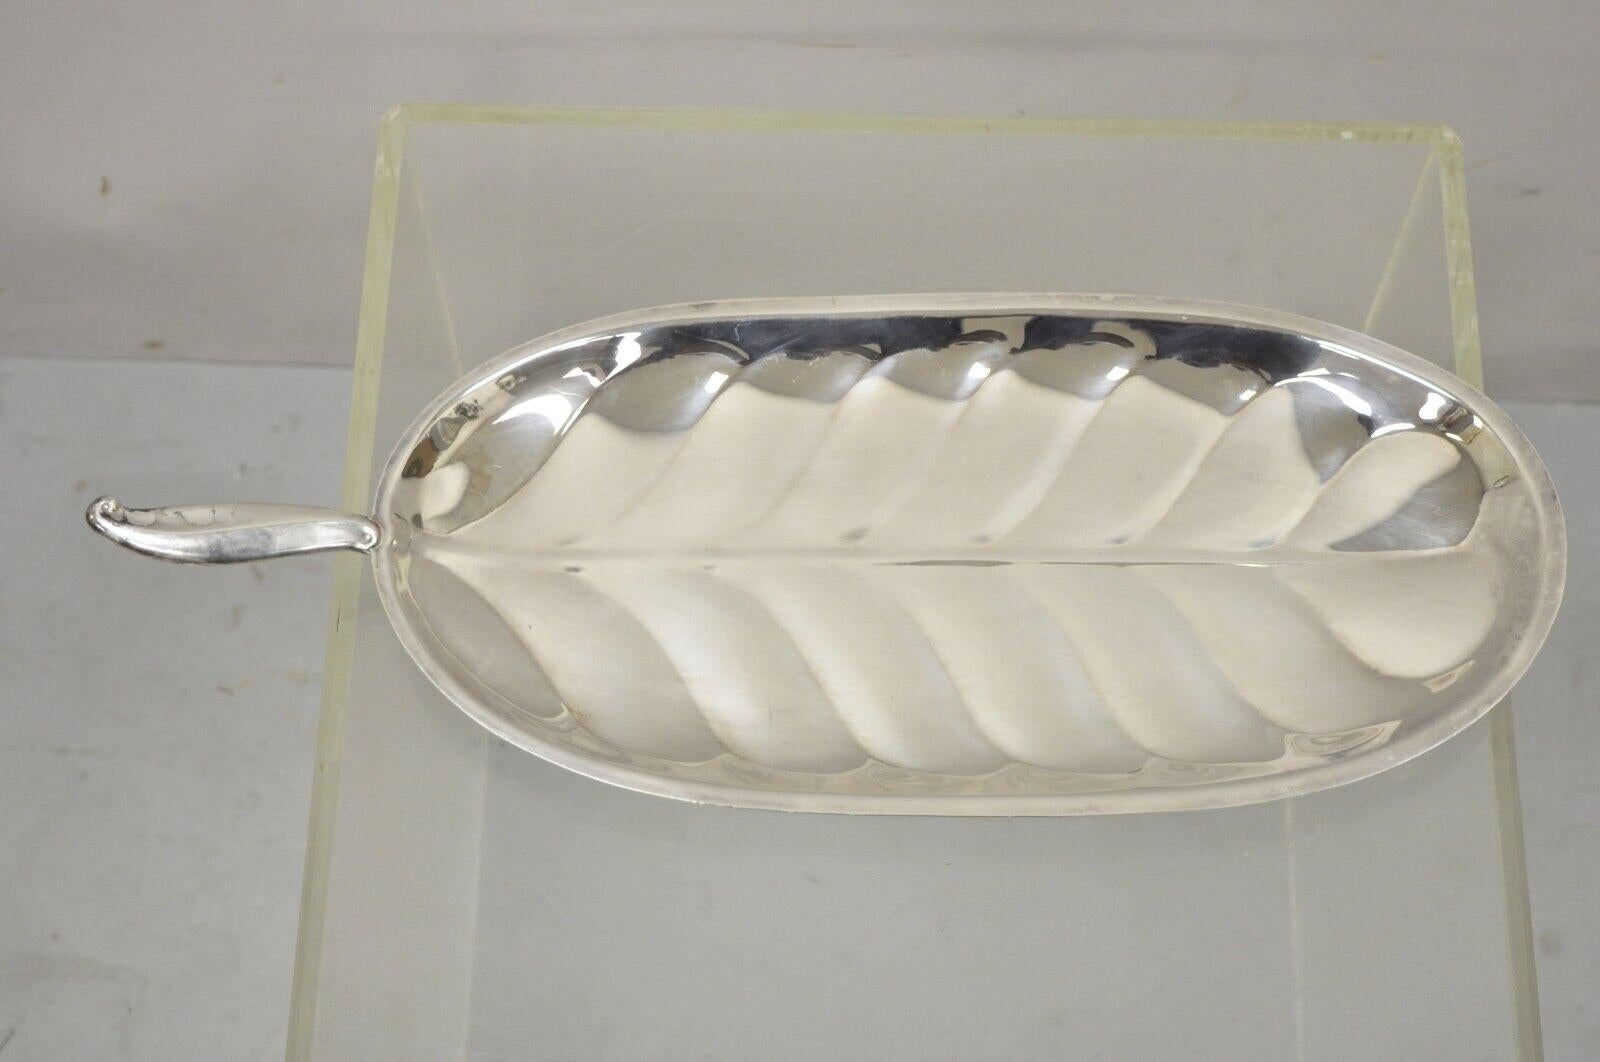 F.B. Rogers silver plate oval leaf form serving tray platter with handle. Item features original label, clean modernist lines, great style and form. Circa mid 20th century. Measurements: 1.5